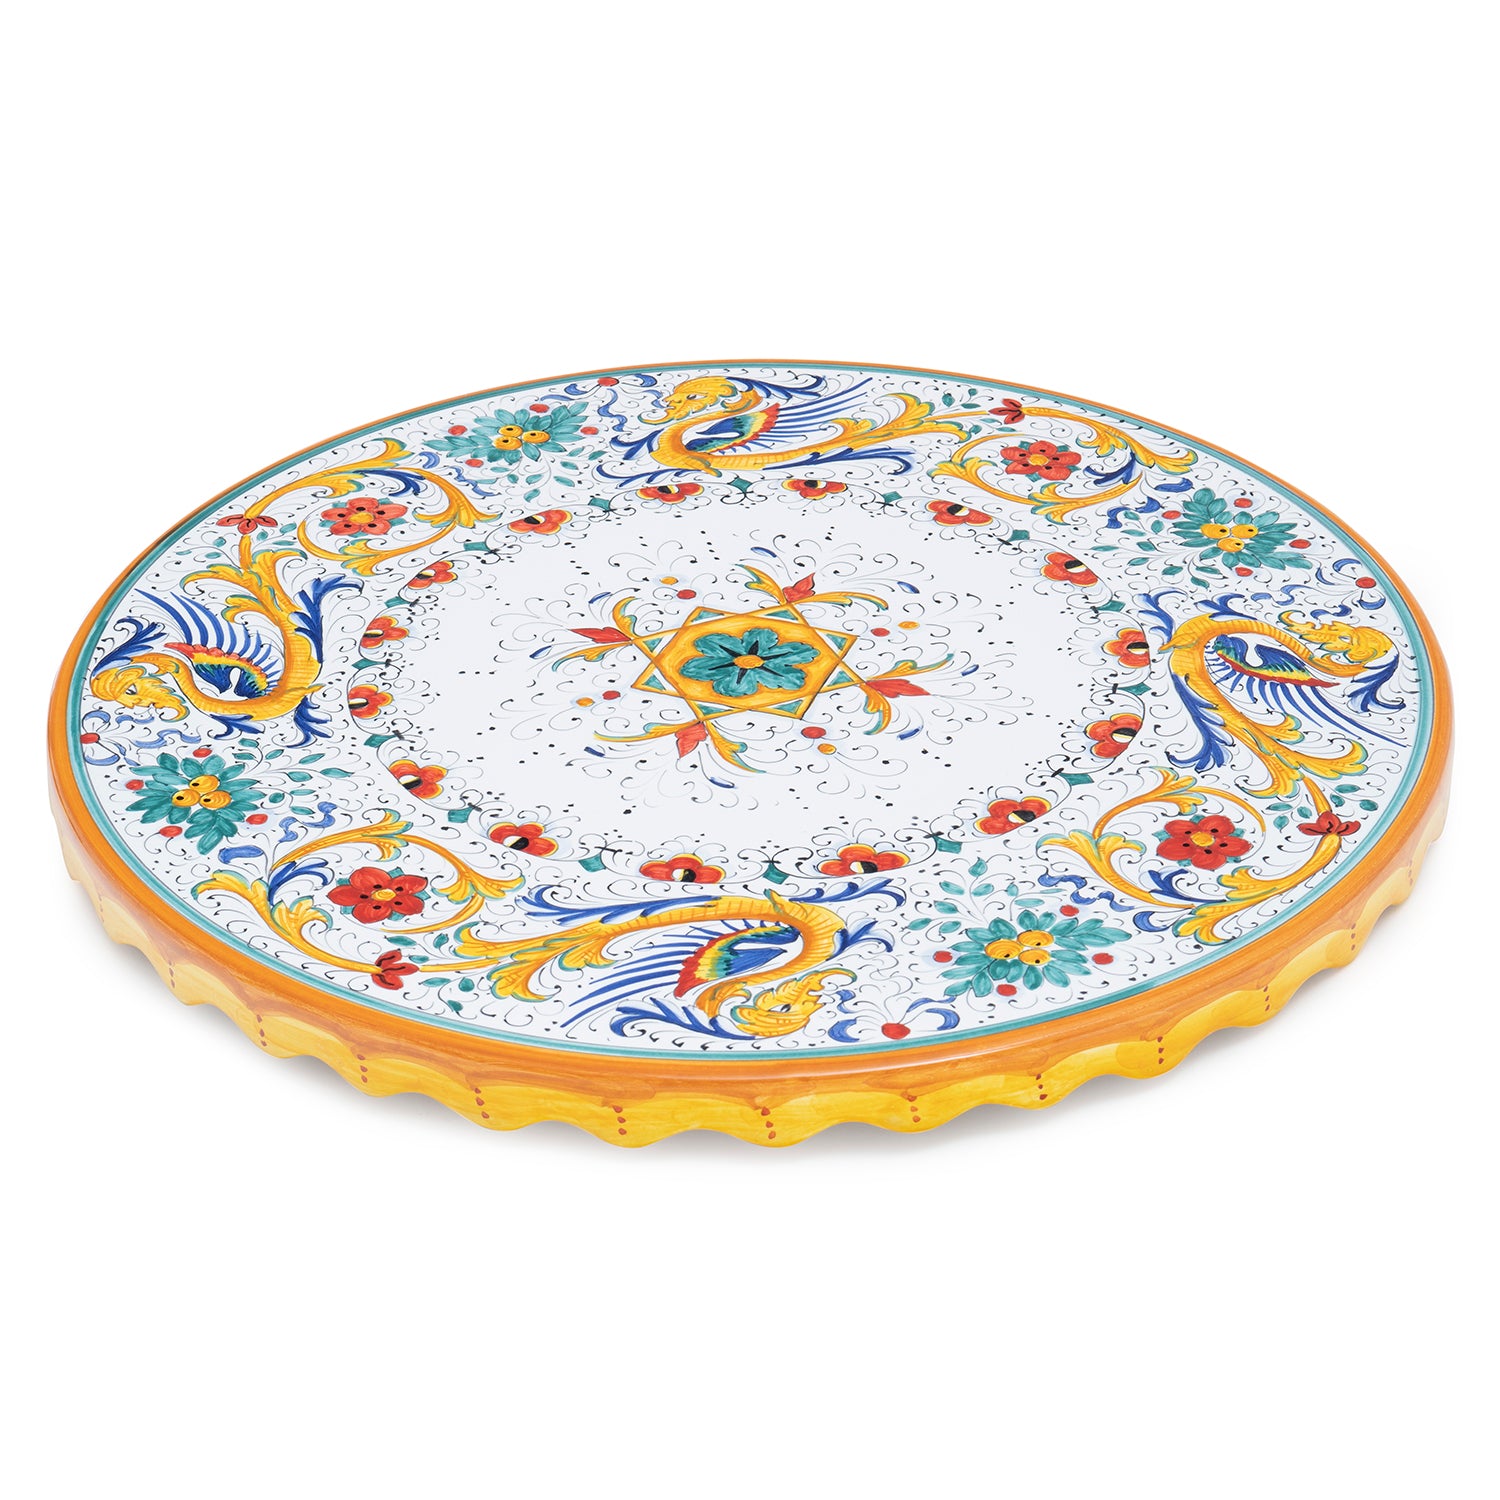 Raffaellesco - Lazy Susan, ceramics, pottery, italian design, majolica, handmade, handcrafted, handpainted, home decor, kitchen art, home goods, deruta, majolica, Artisan, treasures, traditional art, modern art, gift ideas, style, SF, shop small business, artists, shop online, landmark store, legacy, one of a kind, limited edition, gift guide, gift shop, retail shop, decorations, shopping, italy, home staging, home decorating, home interiors